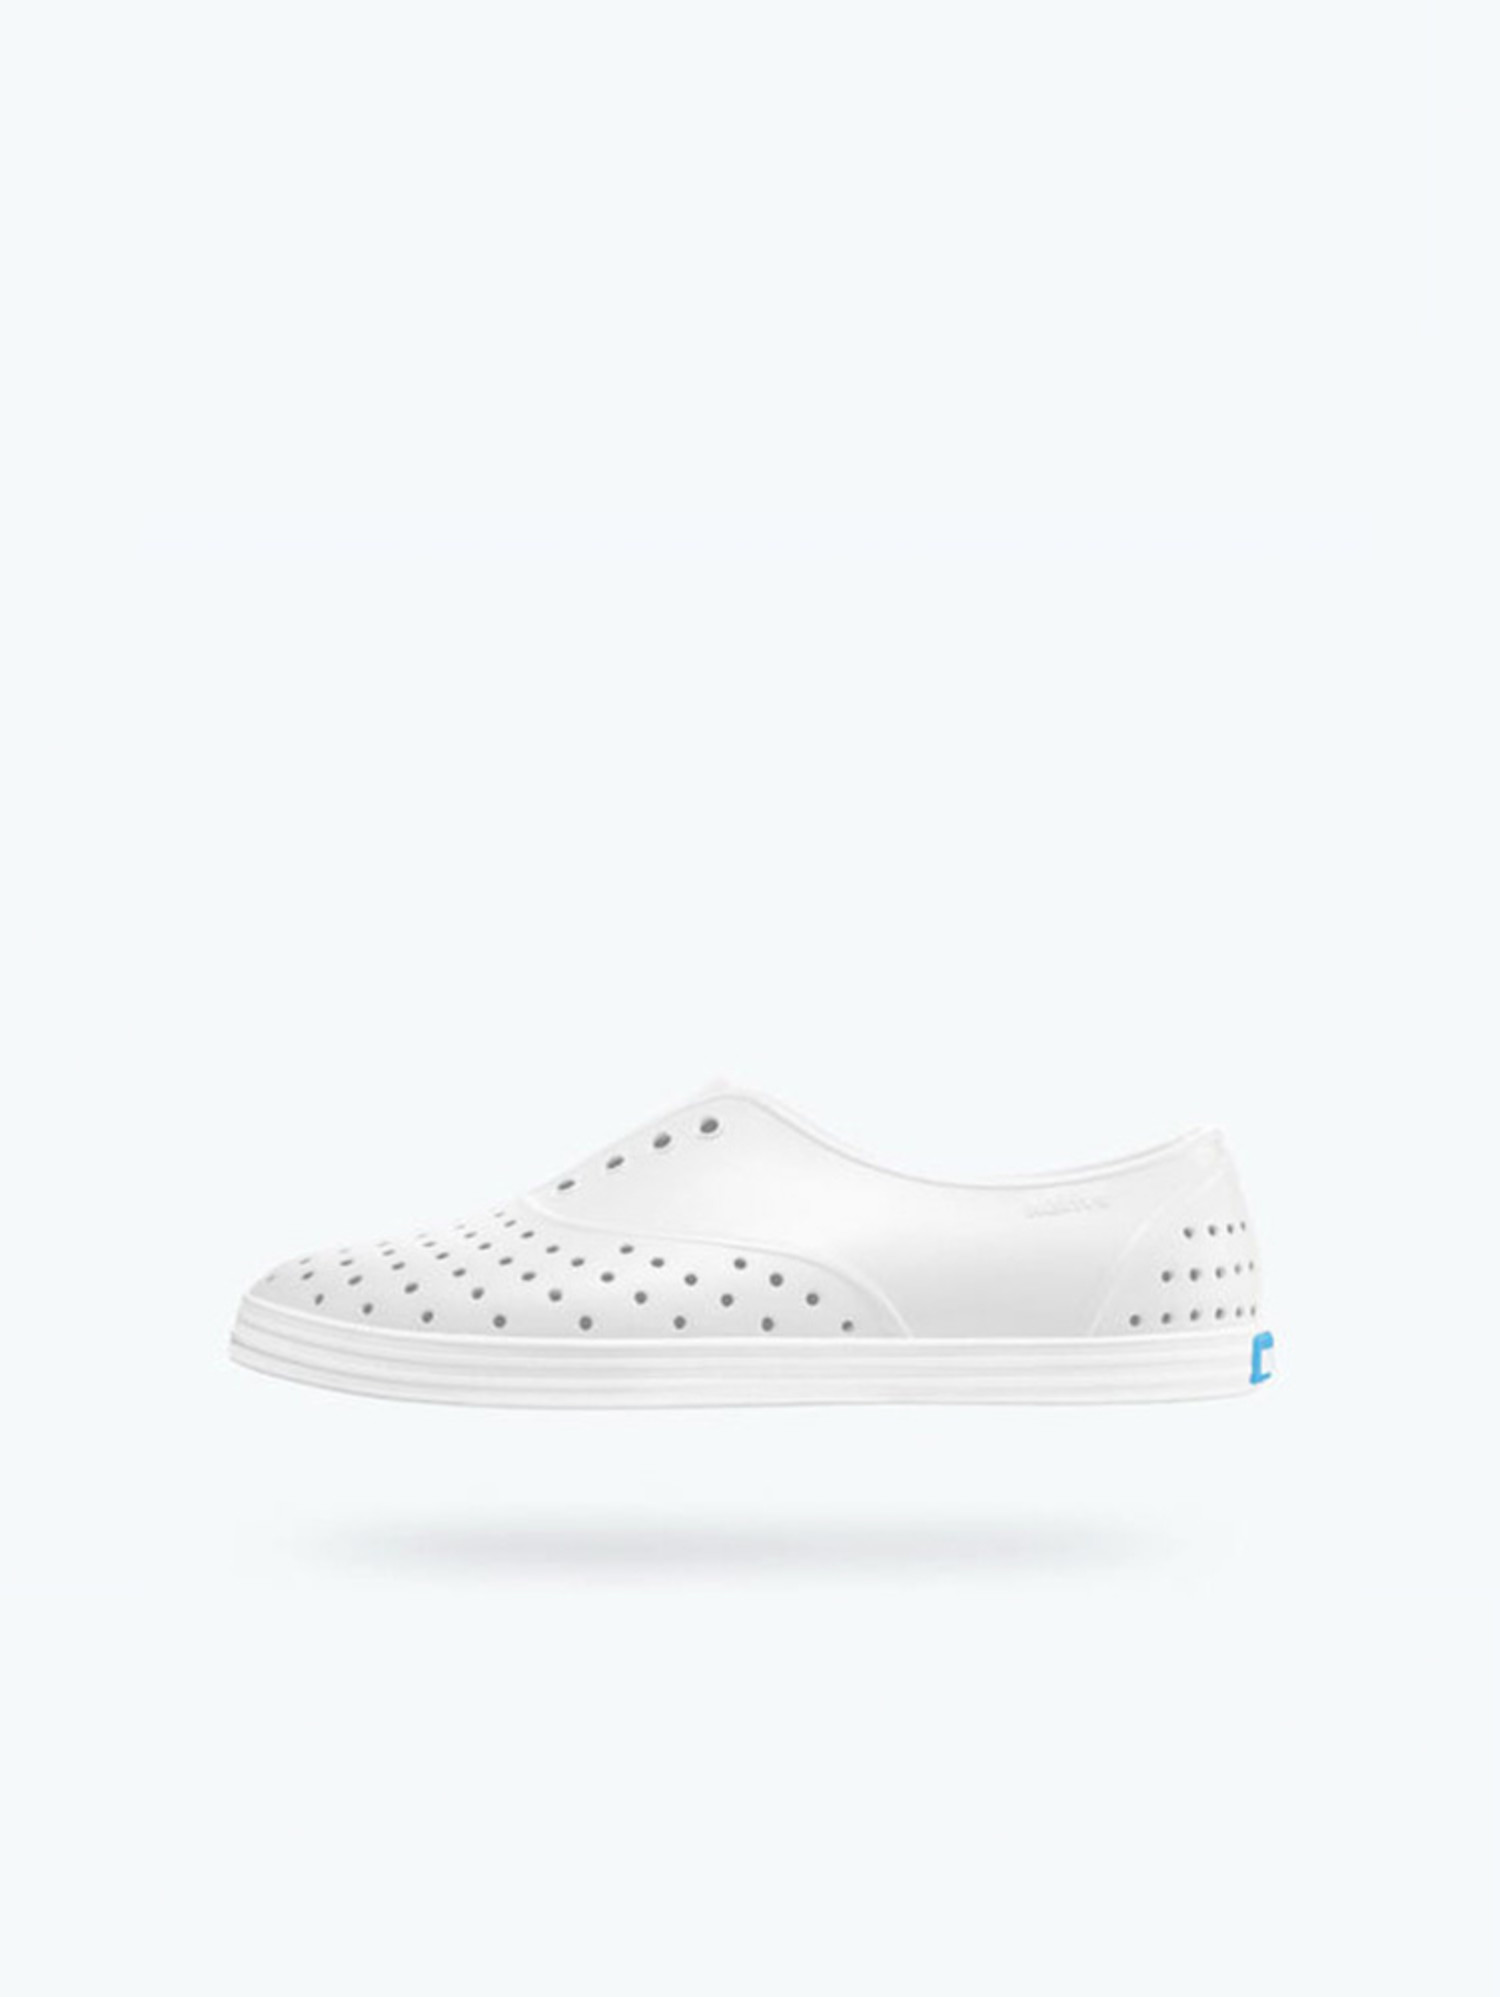 Jericho Slip-On in White by Native 